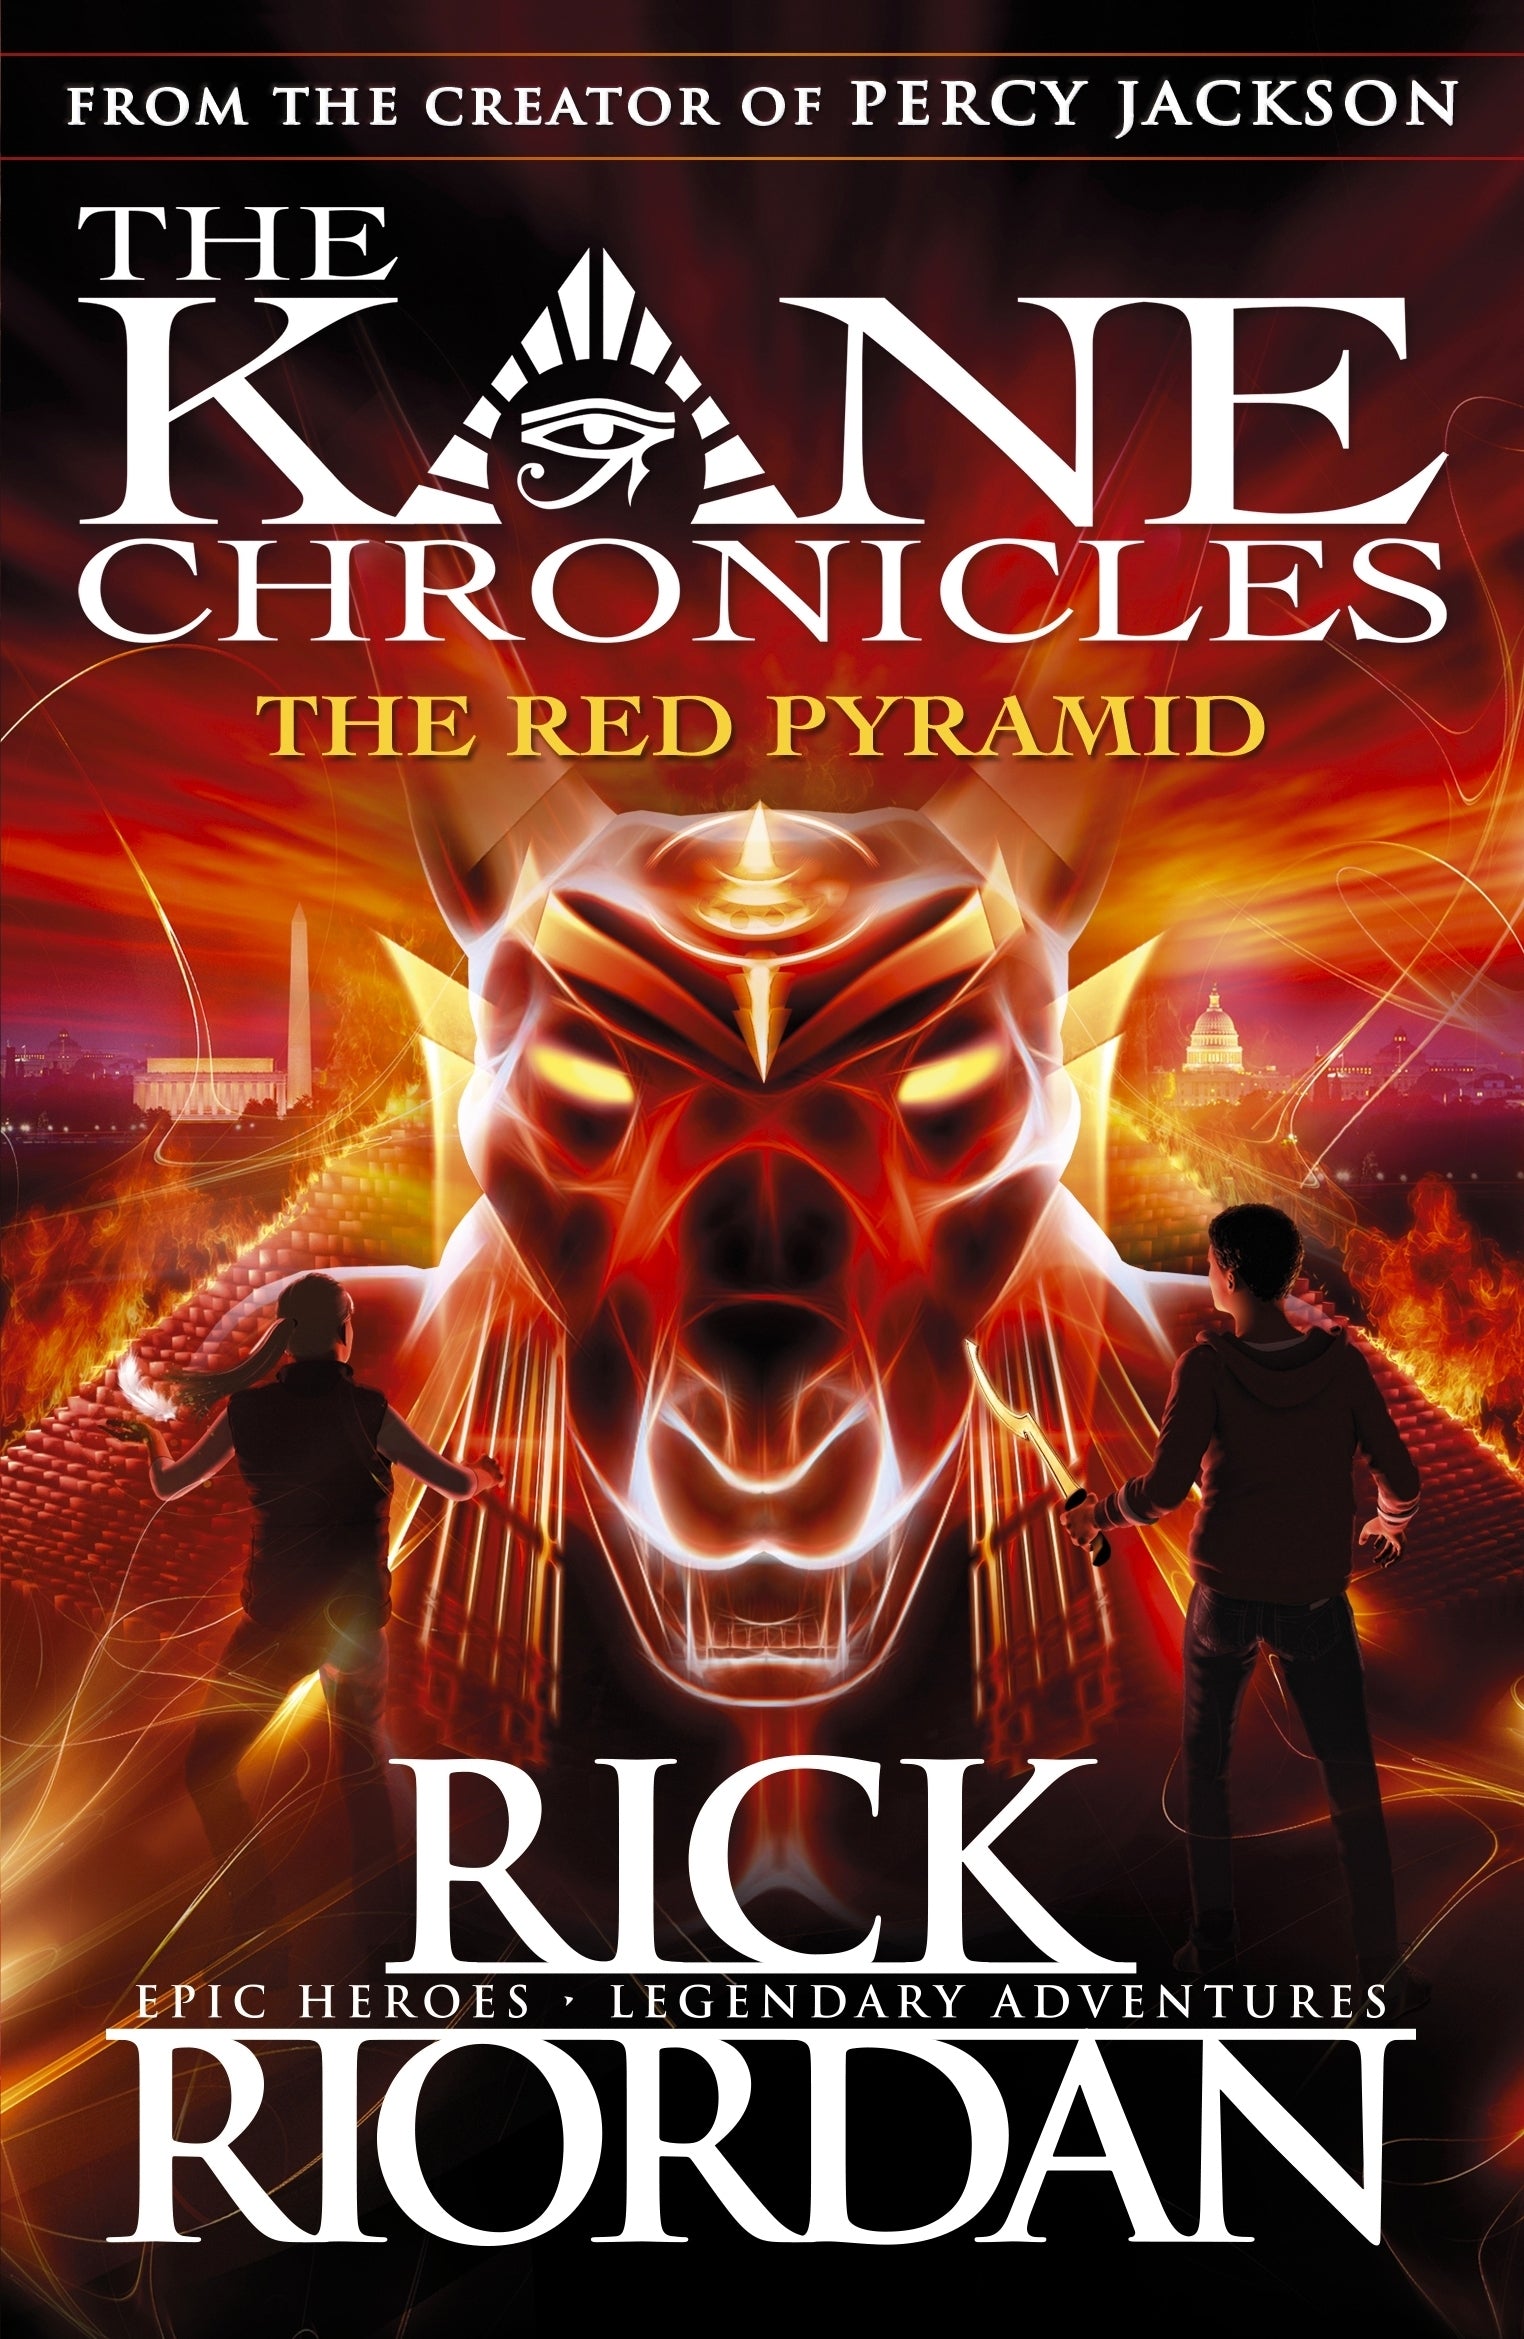 THE KANE CHRONICLES THE RED PYRAMID